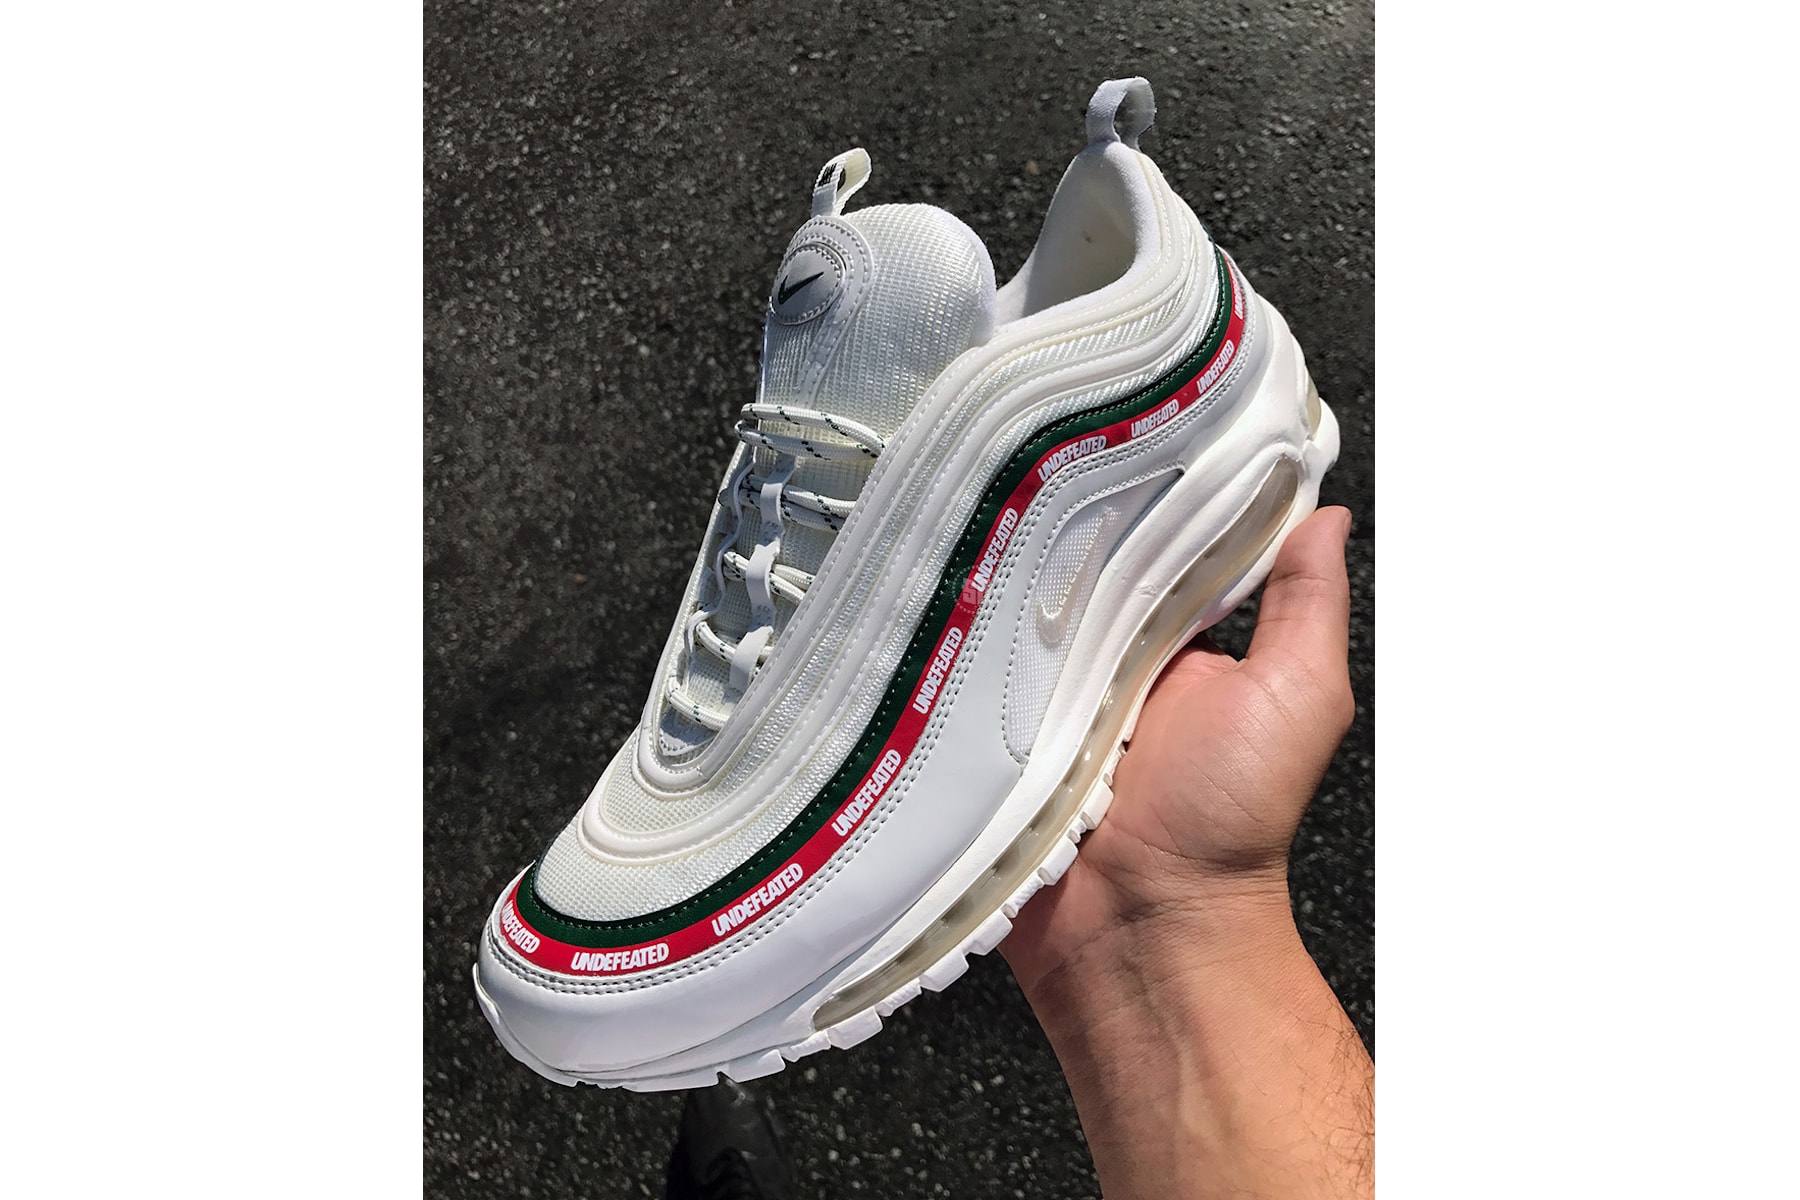 UNDEFEATED Nike Air Max 97 White More Details